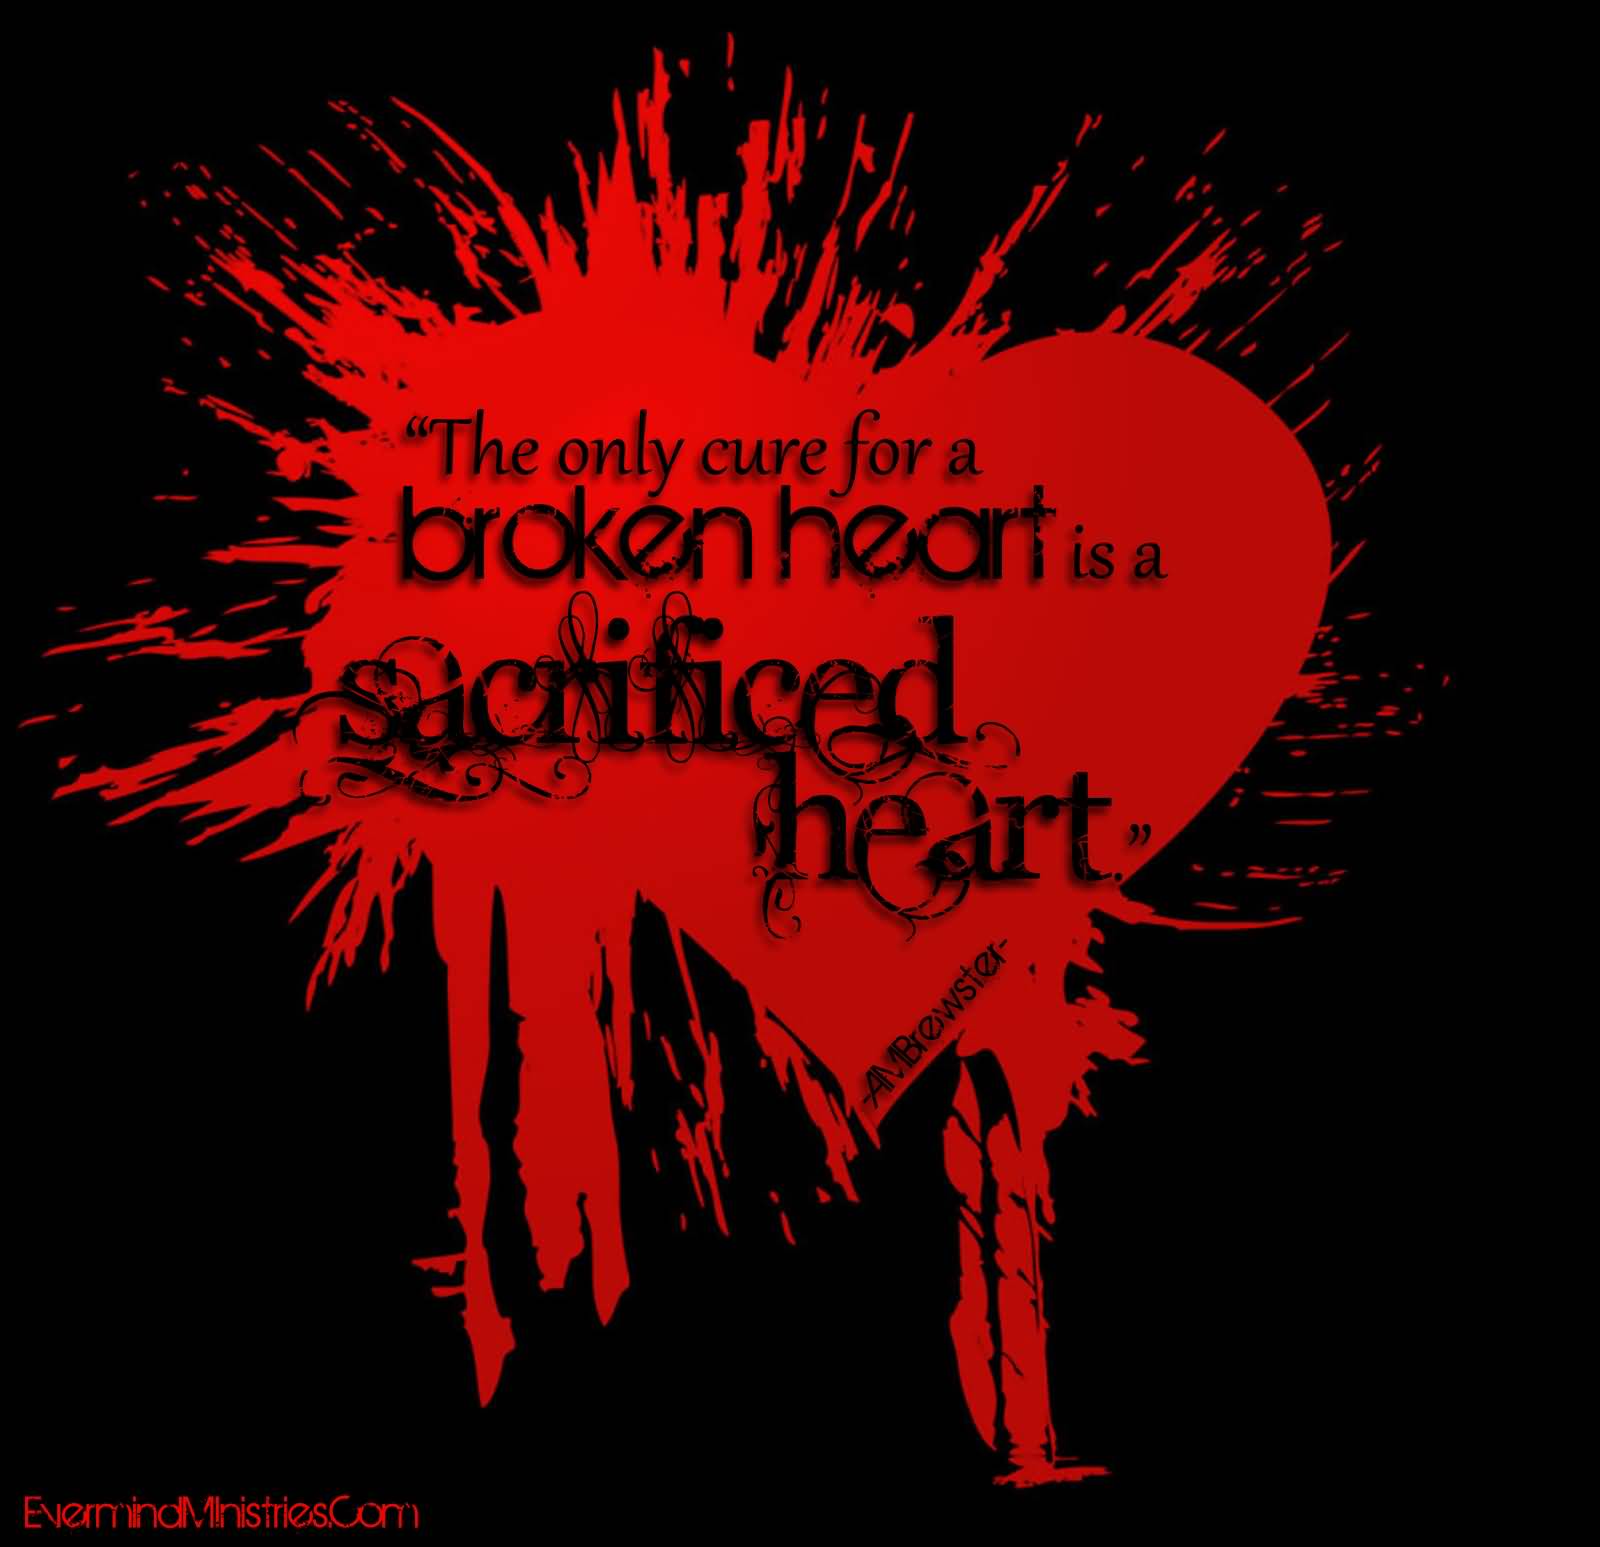 The Only Cure For A Broken Heart Is A Sacrificed Heart